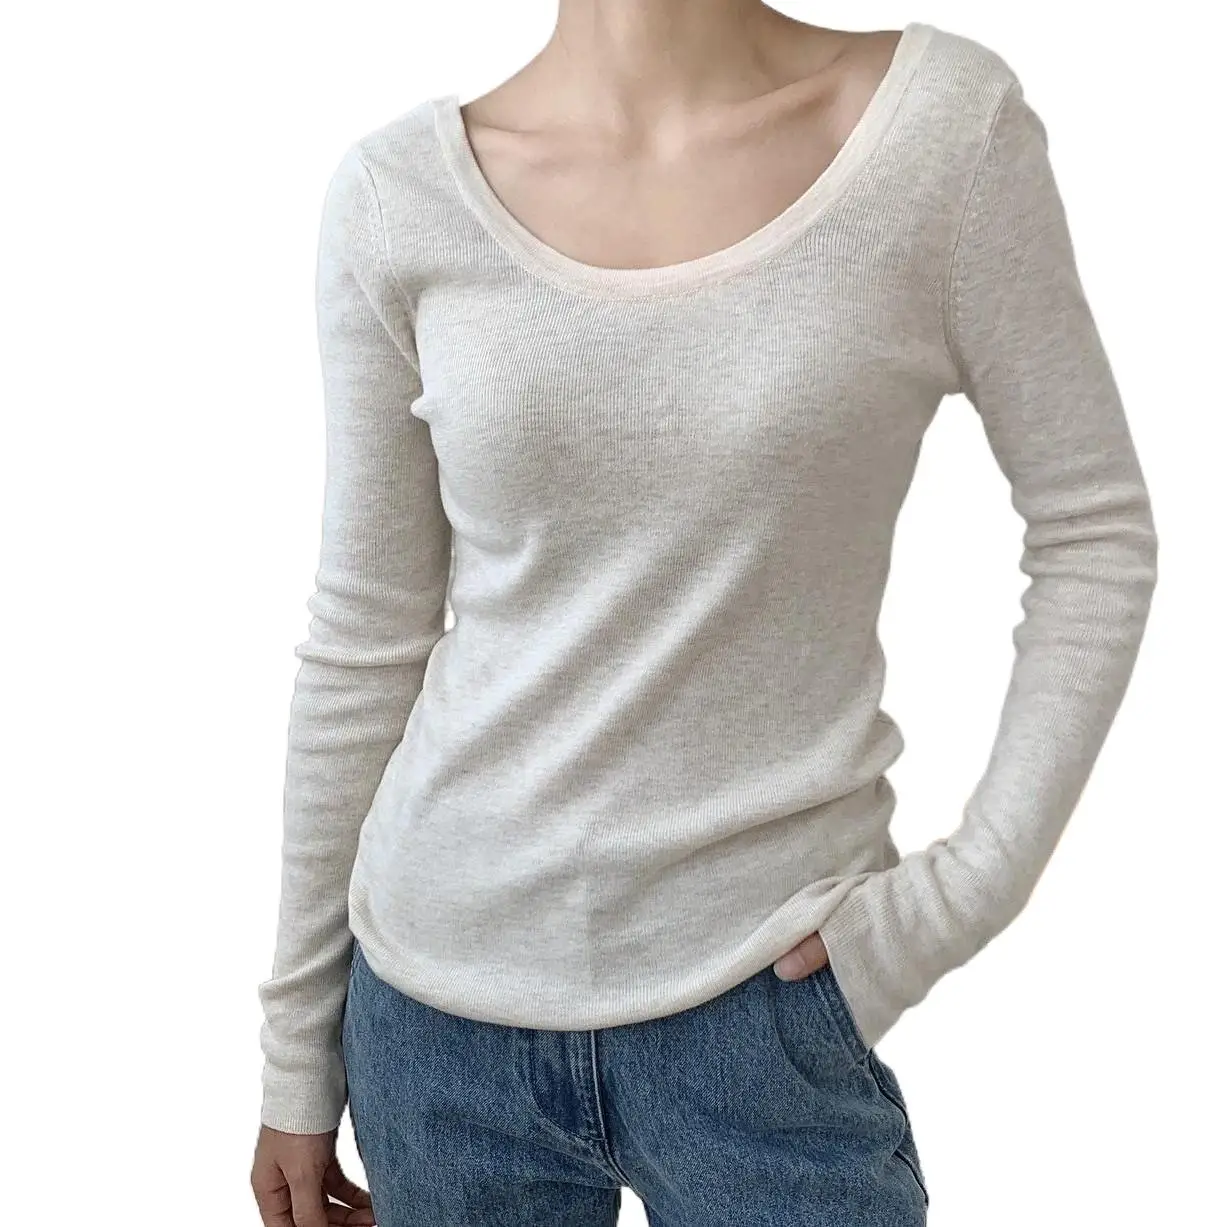 

Knit V Back Cotton Scoop Neck Tops Women Slim Soft Solid Color Knitwear For Women Long-sleeved Underlay Blouse Thin One Size